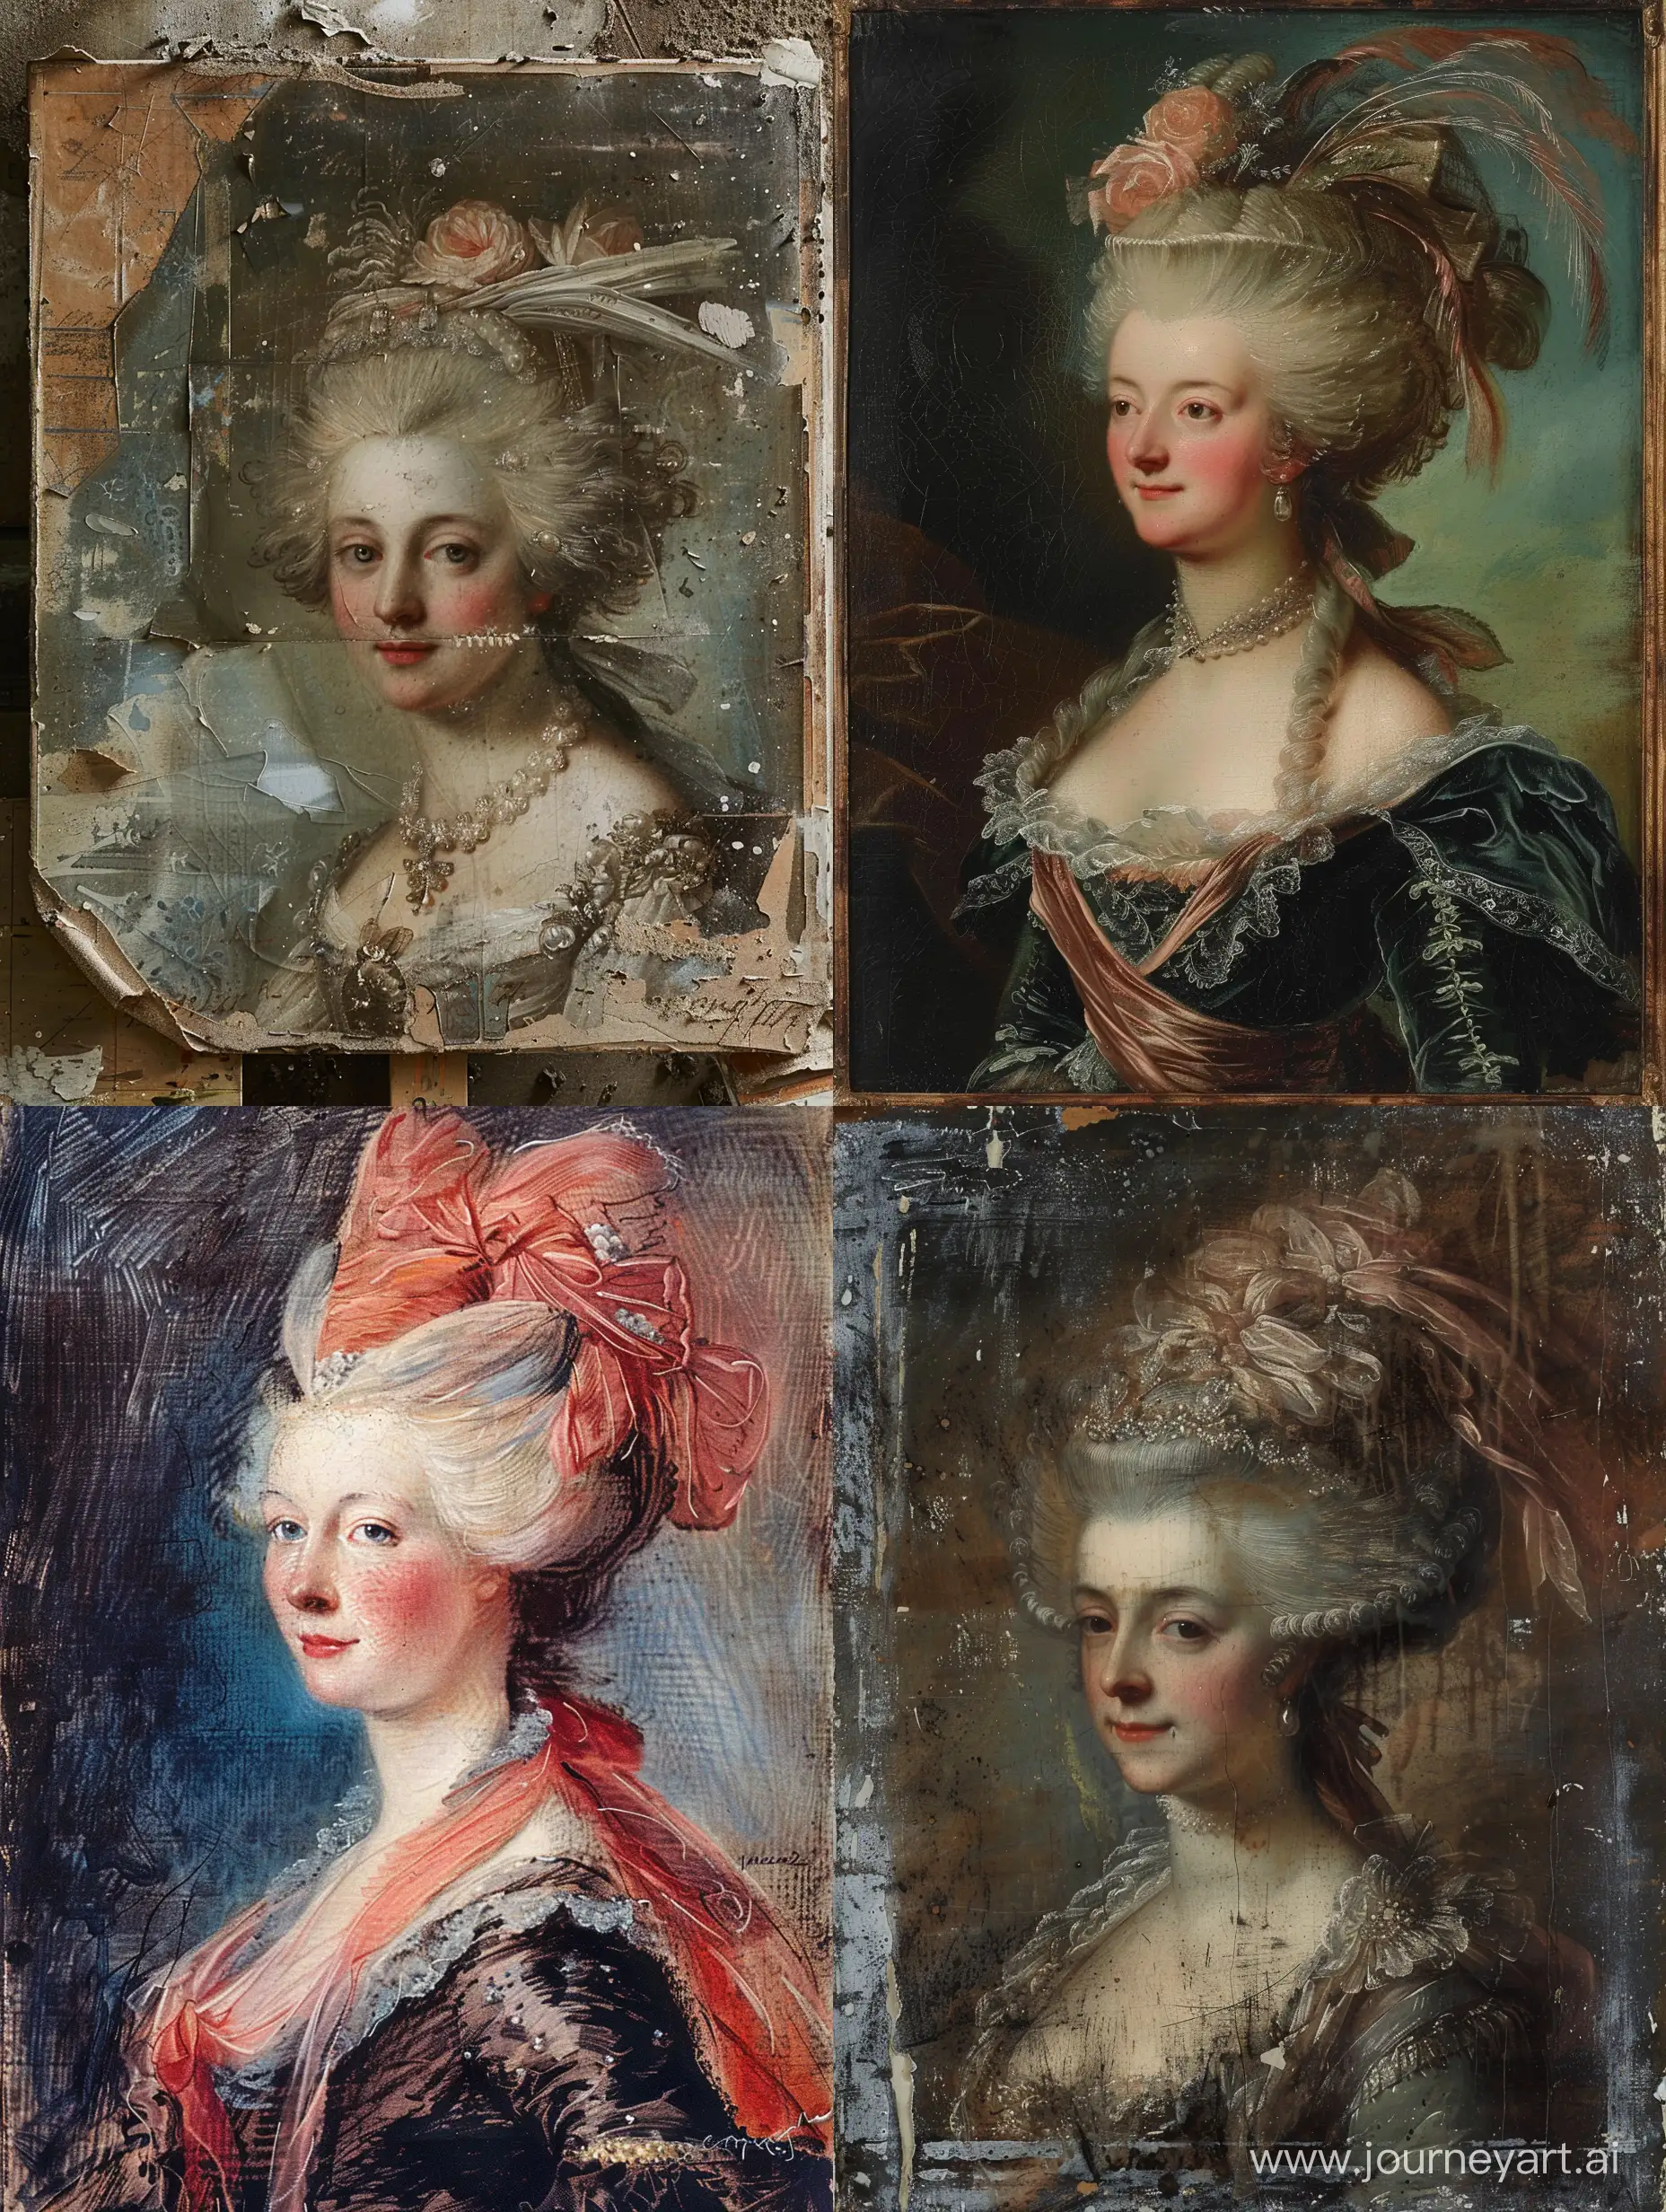 Unfinished Portrait painting of Marie Antoinette by Jaques-Louis David